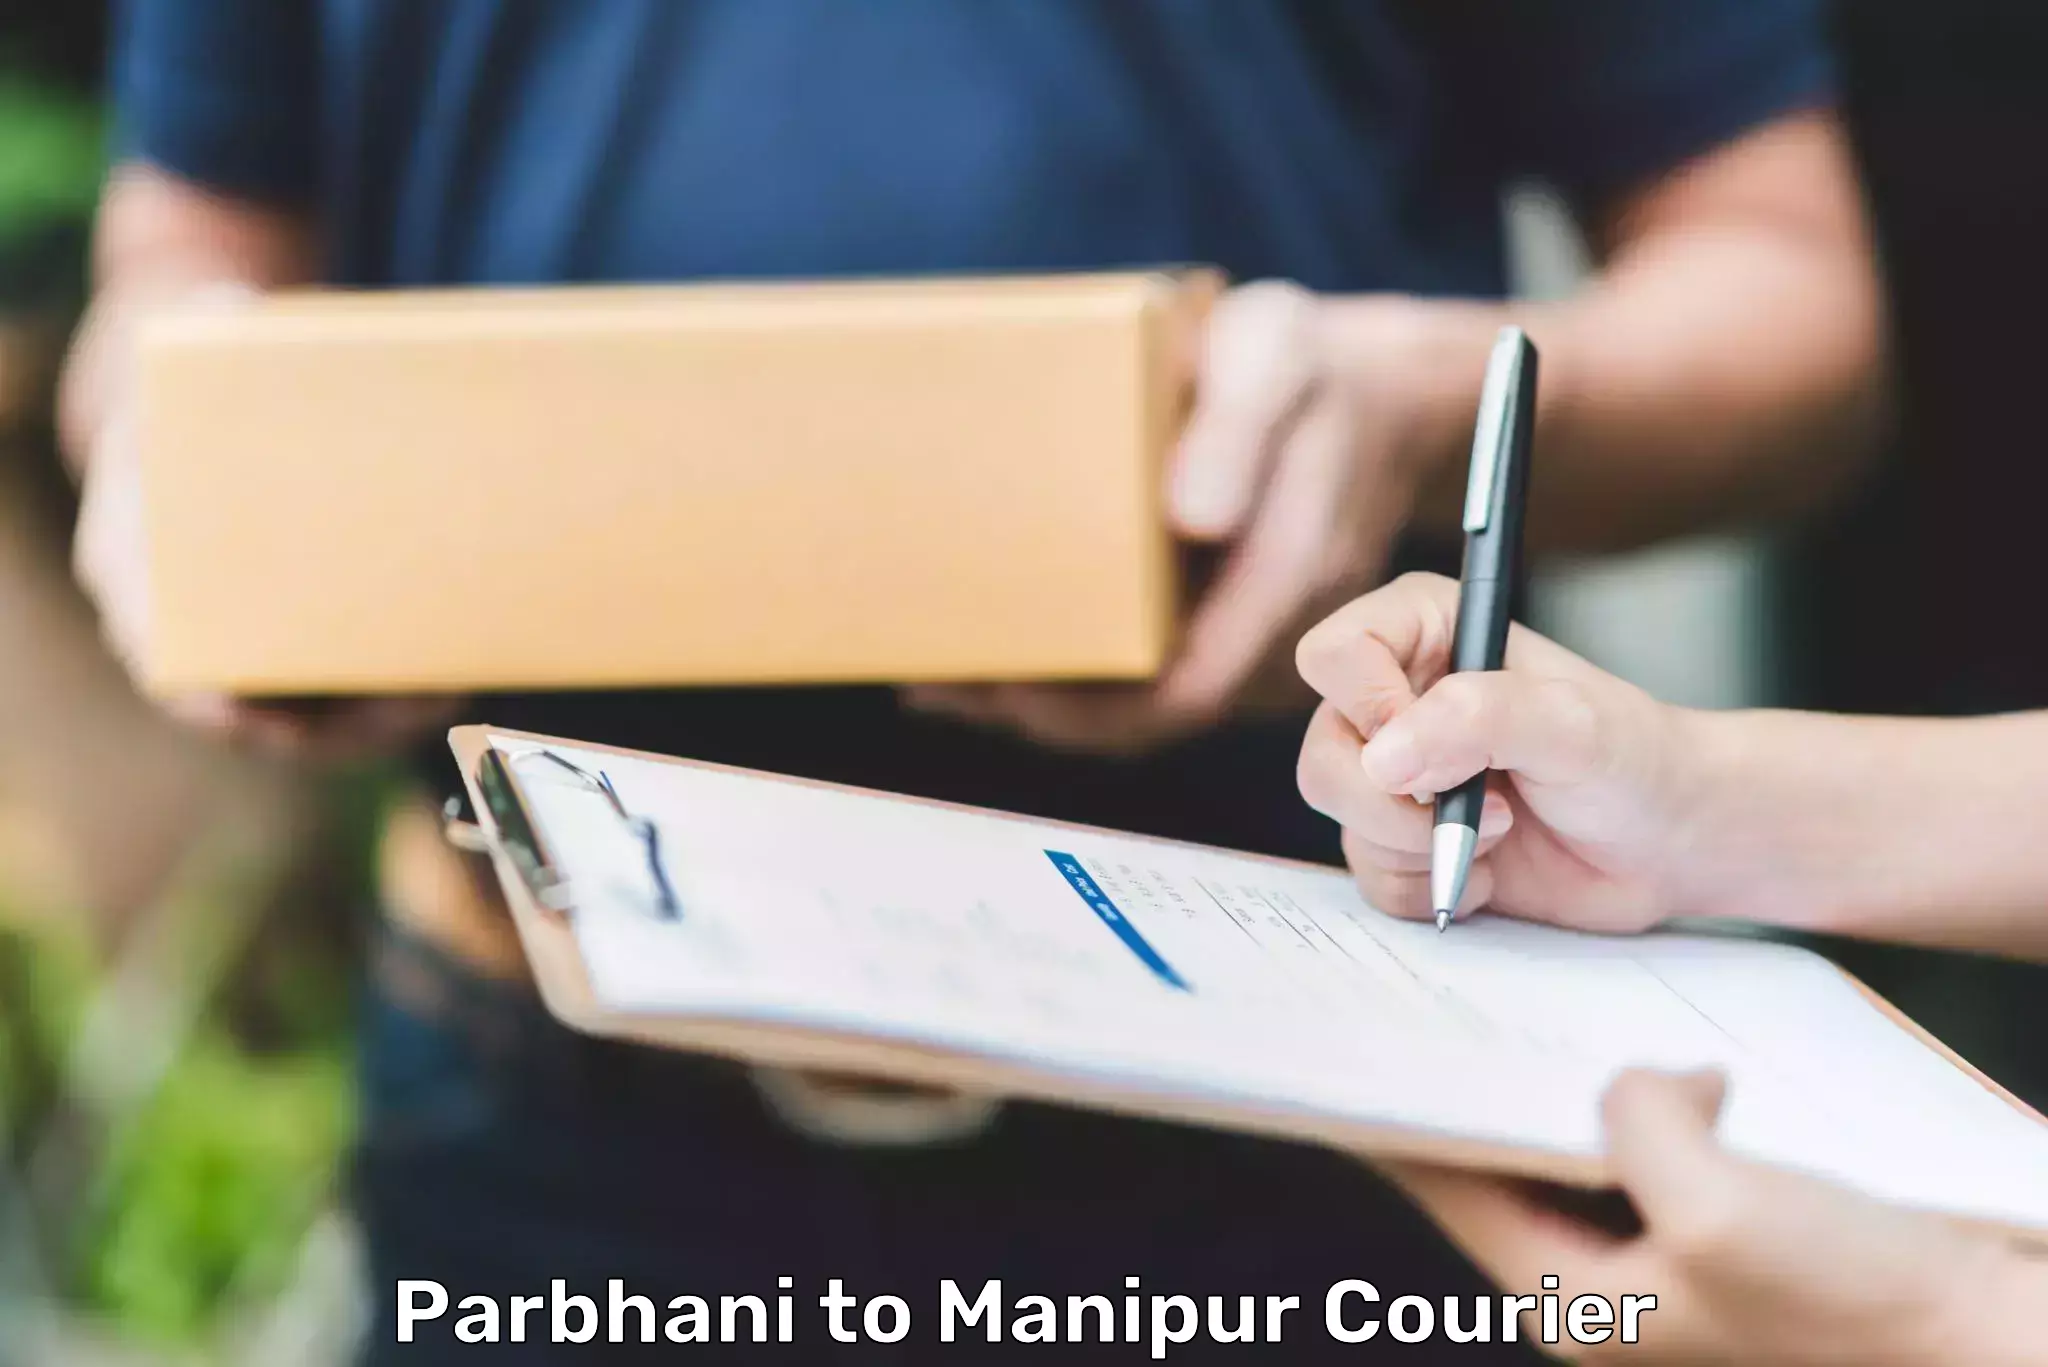 Reliable delivery network Parbhani to Manipur